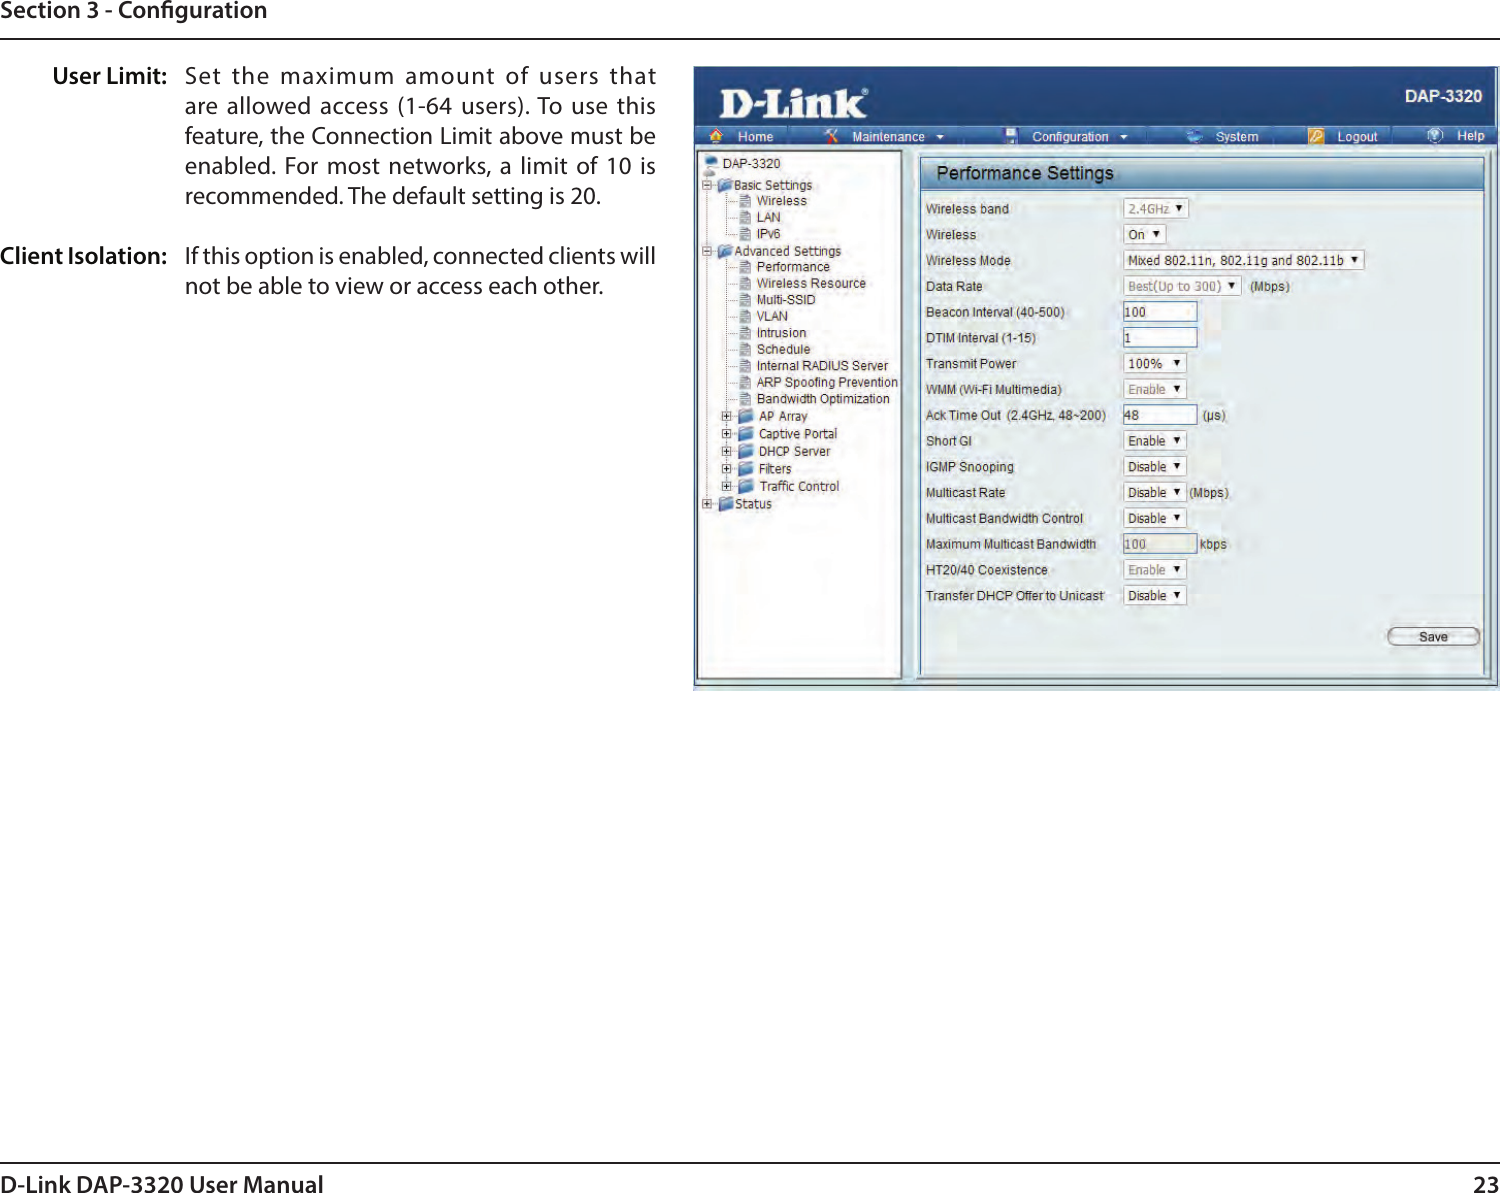 23D-Link DAP-3320 User ManualSection 3 - CongurationSet the maximum amount of users that are allowed access (1-64 users). To use this feature, the Connection Limit above must be enabled. For most networks, a limit of 10 is recommended. The default setting is 20.If this option is enabled, connected clients will not be able to view or access each other.User Limit:Client Isolation: